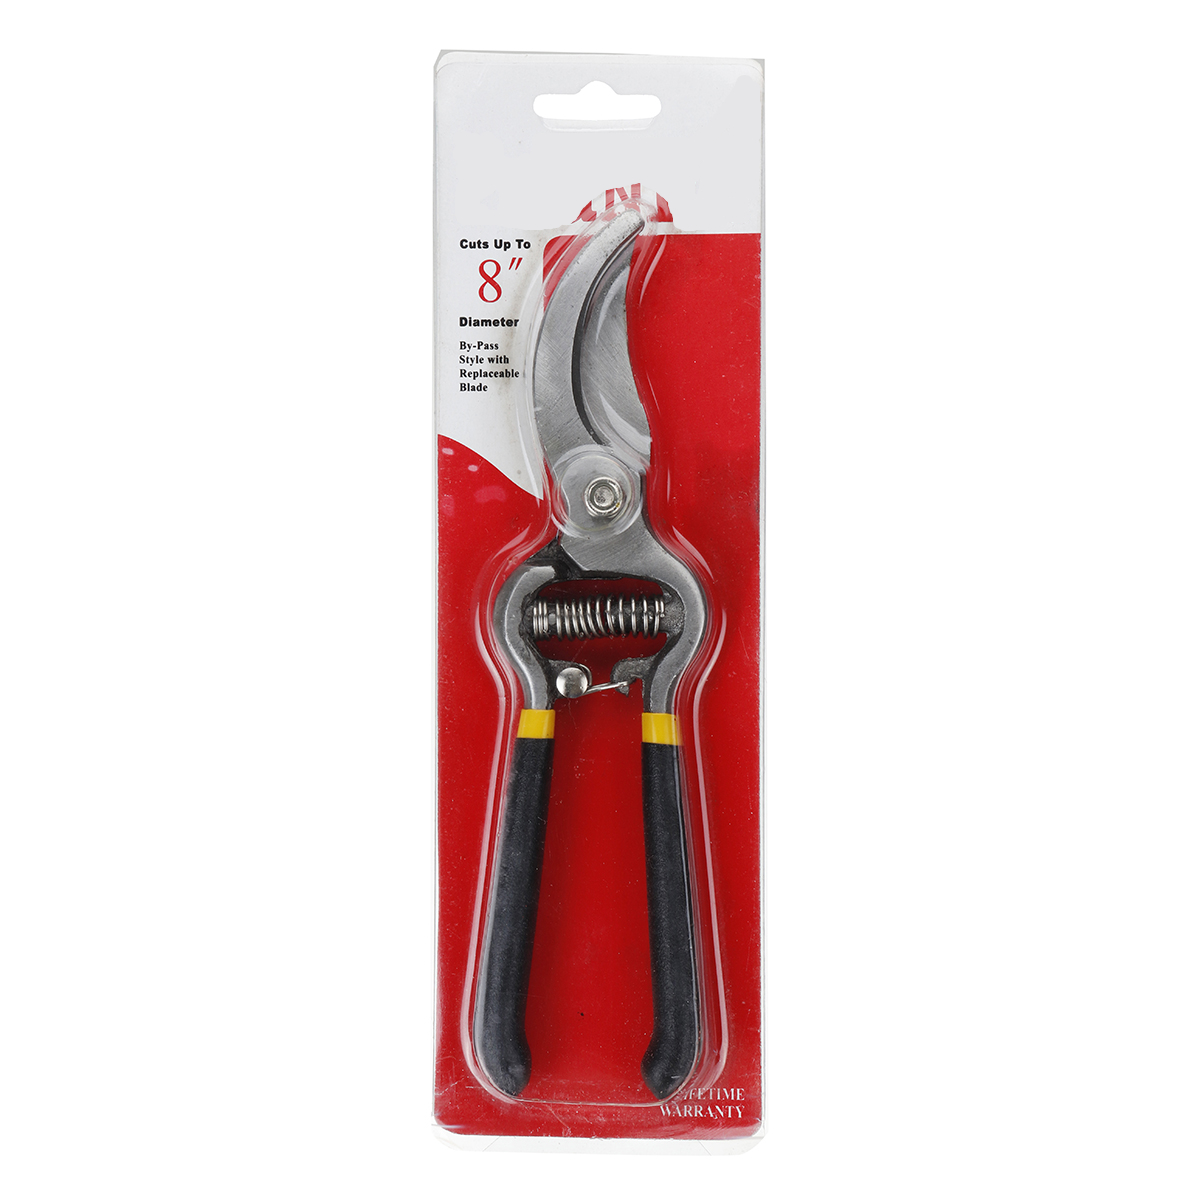 8inch-Carbon-Steel-Professional-Loppers-Garden-Cutter-Bypass-Tree-Pruning-Shears-Clippers-1412616-9